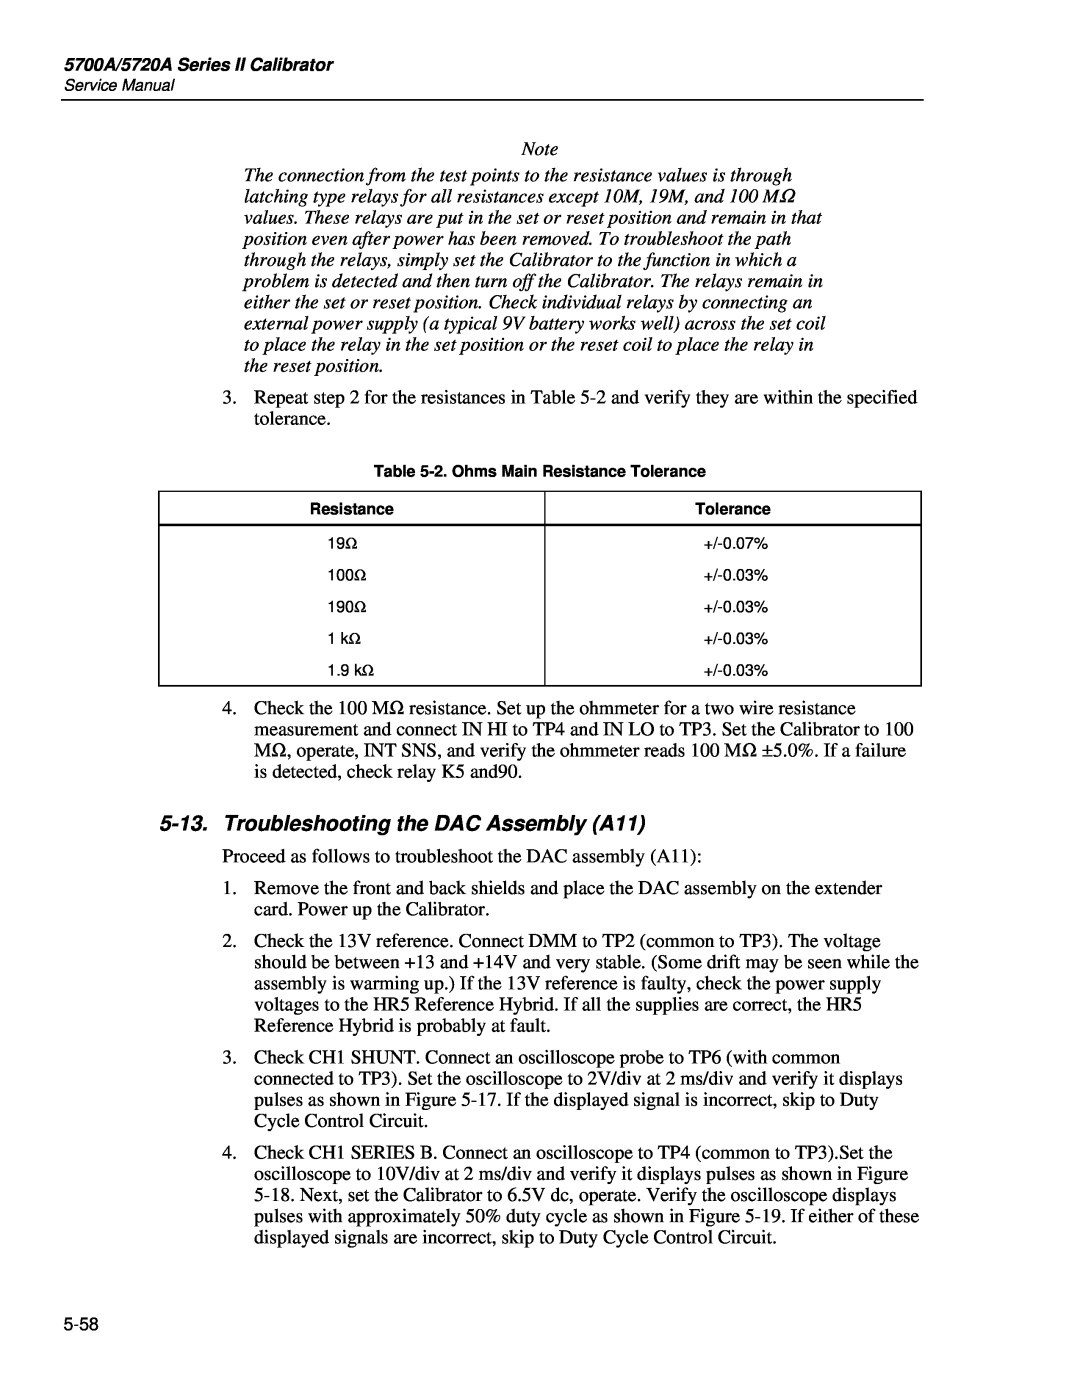 Fluke 5720A service manual Troubleshooting the DAC Assembly A11 